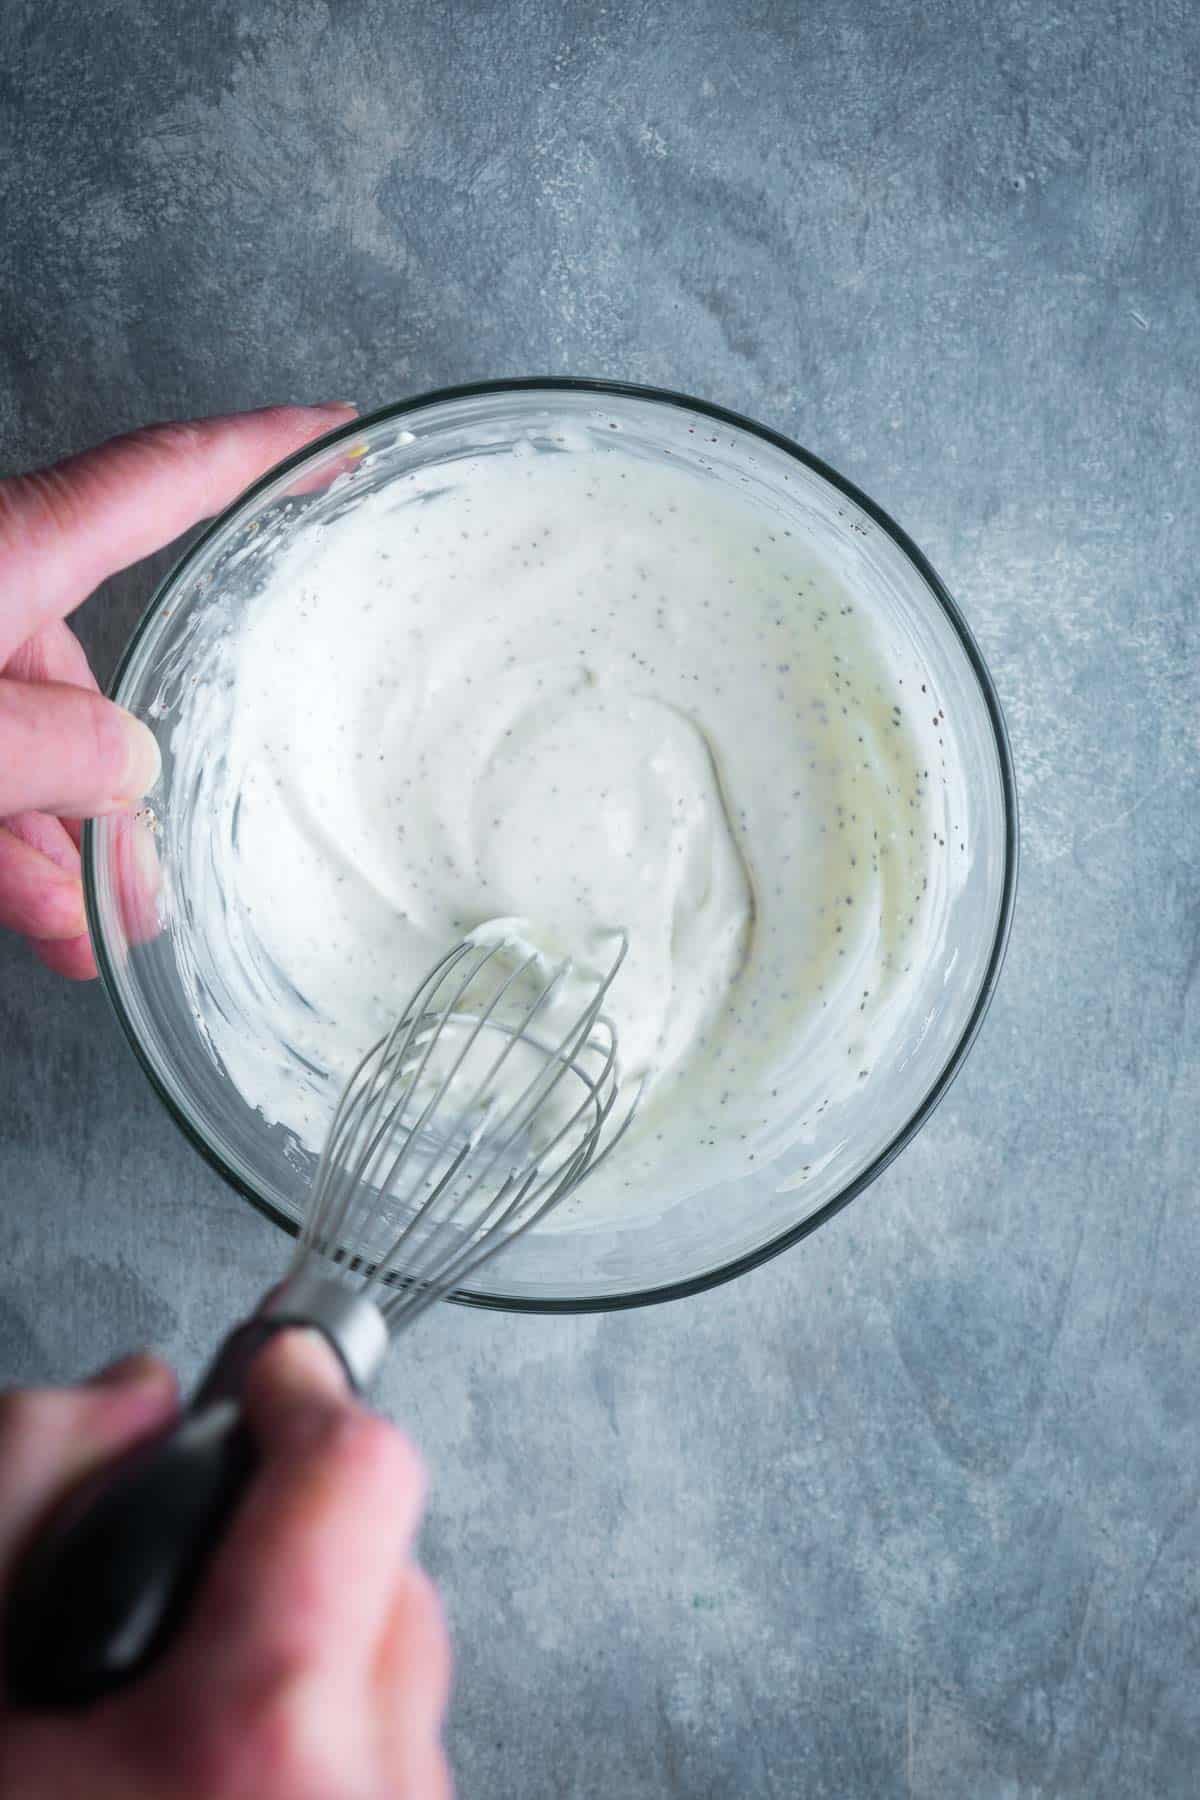 coleslaw salad dressing ingredients are whisked in glass mixing bowl